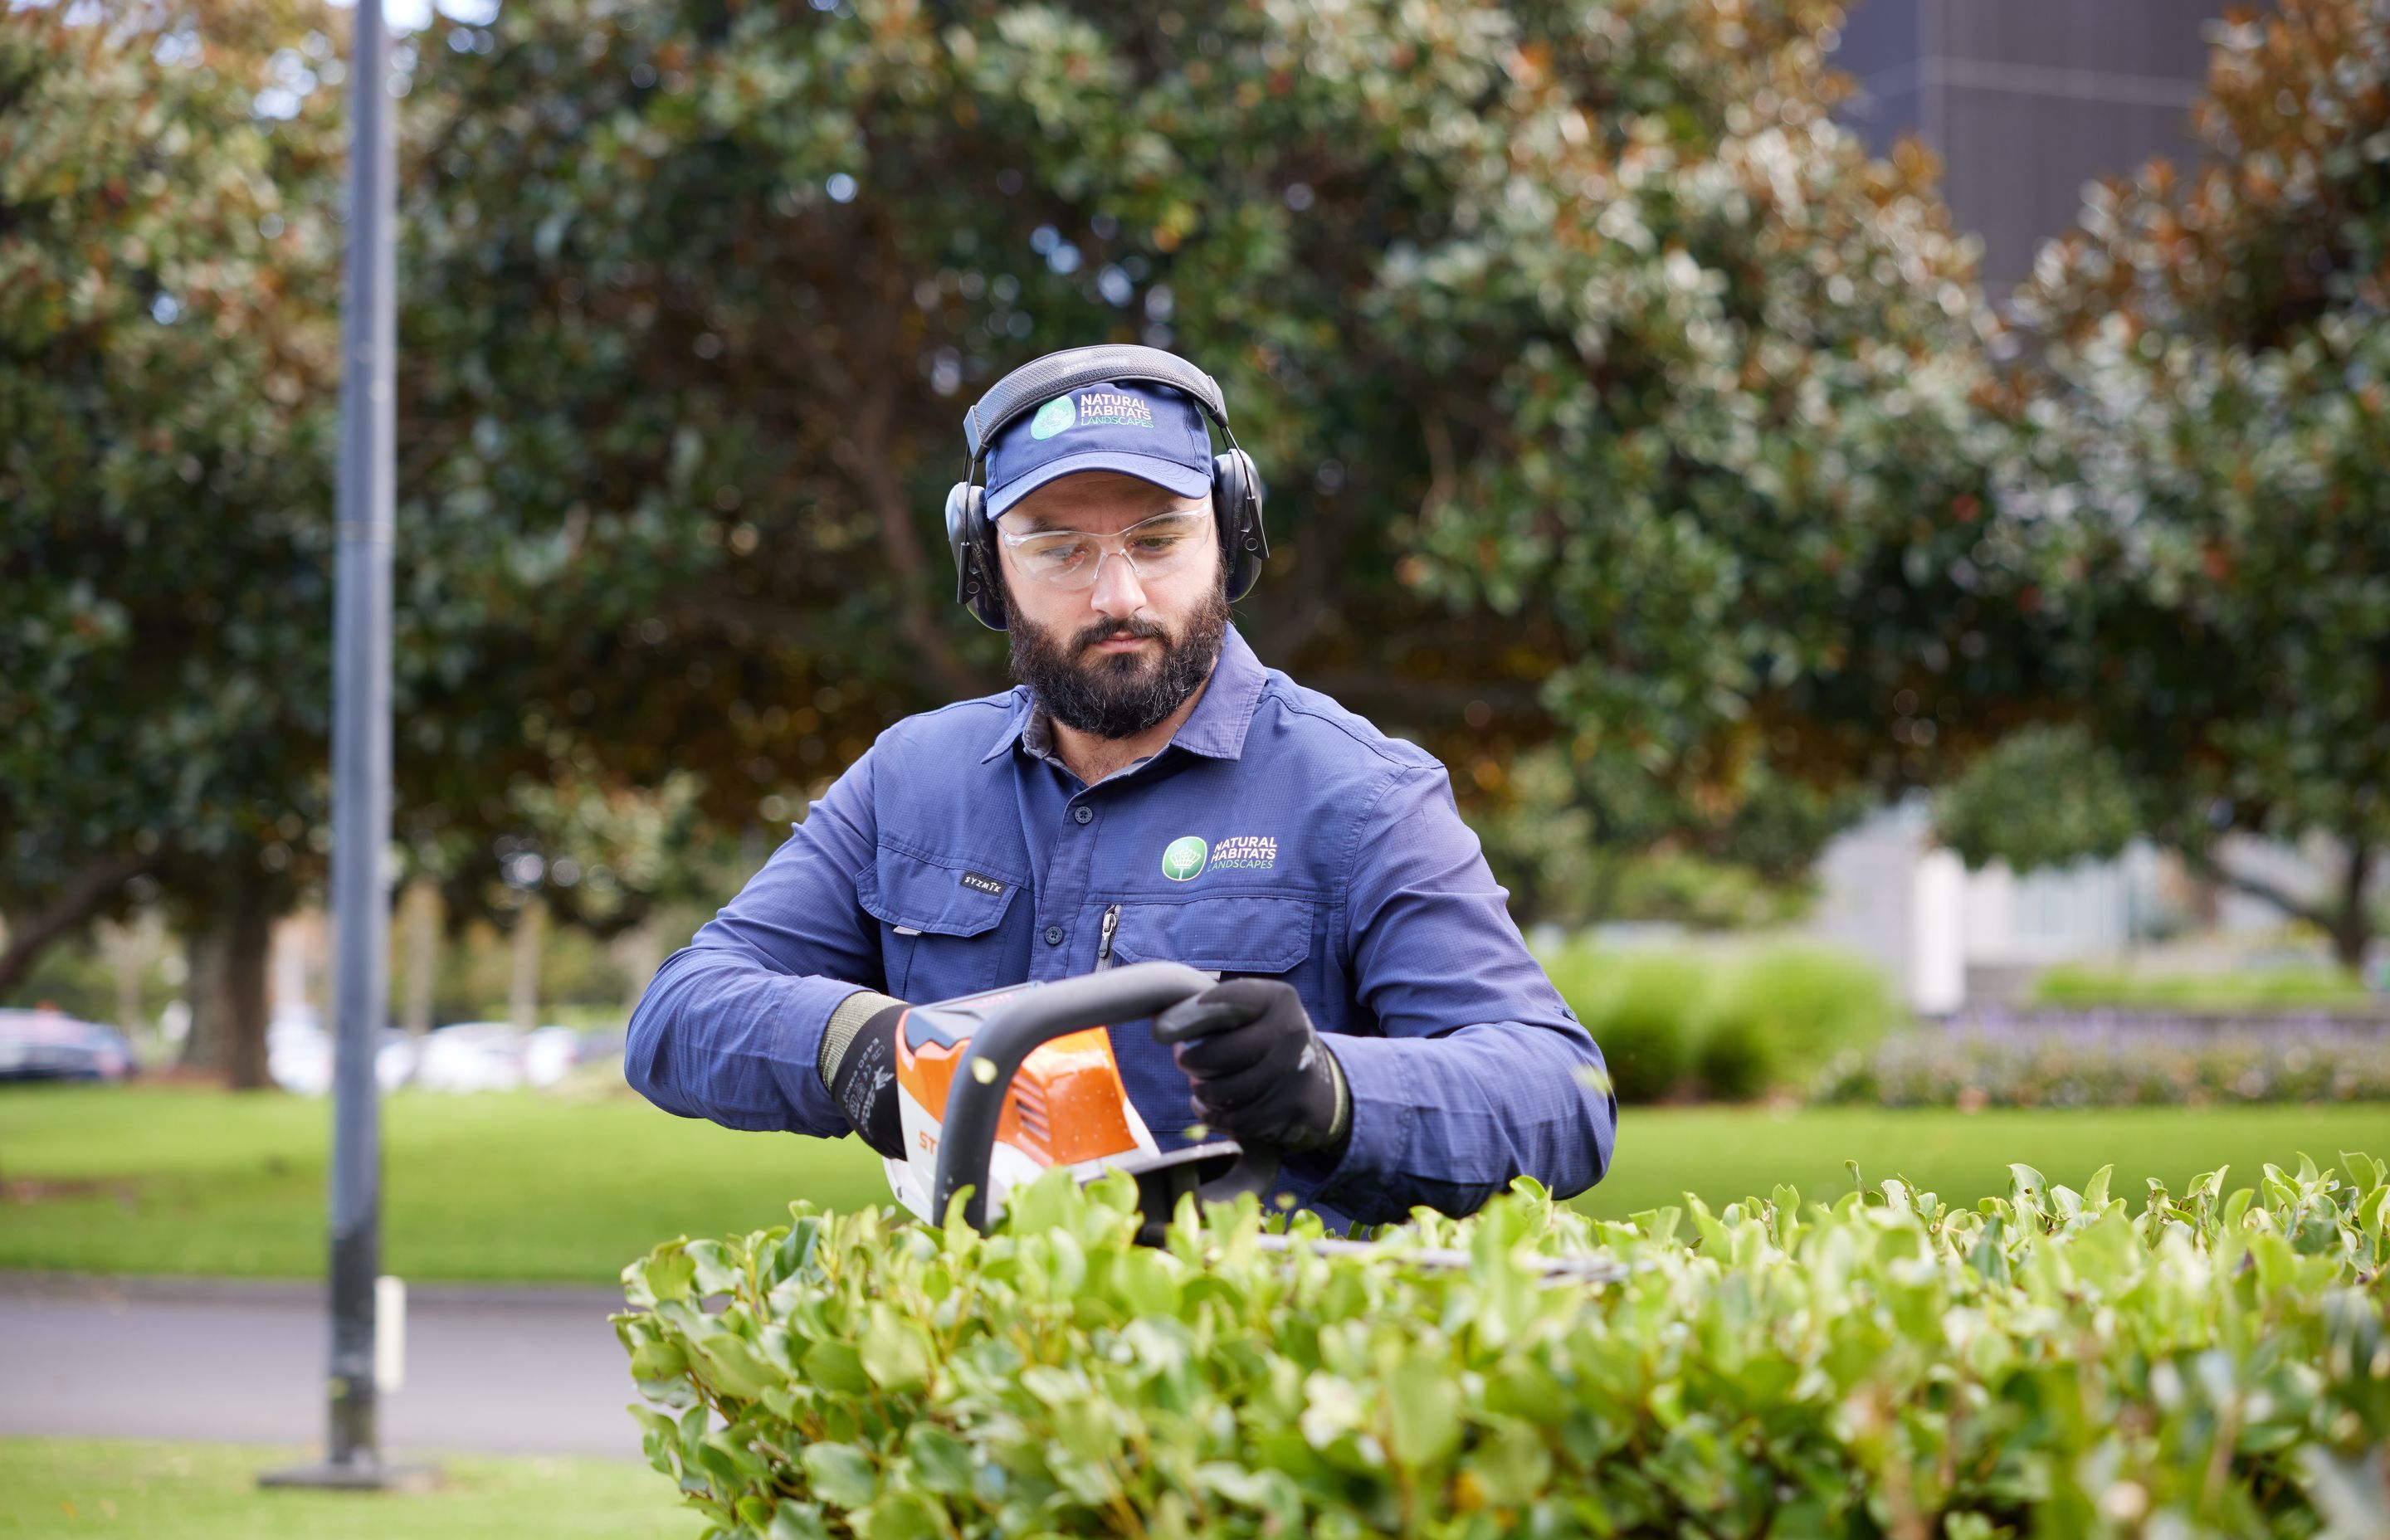 A qualified horticulturalist trims hedges at Smales Farm.